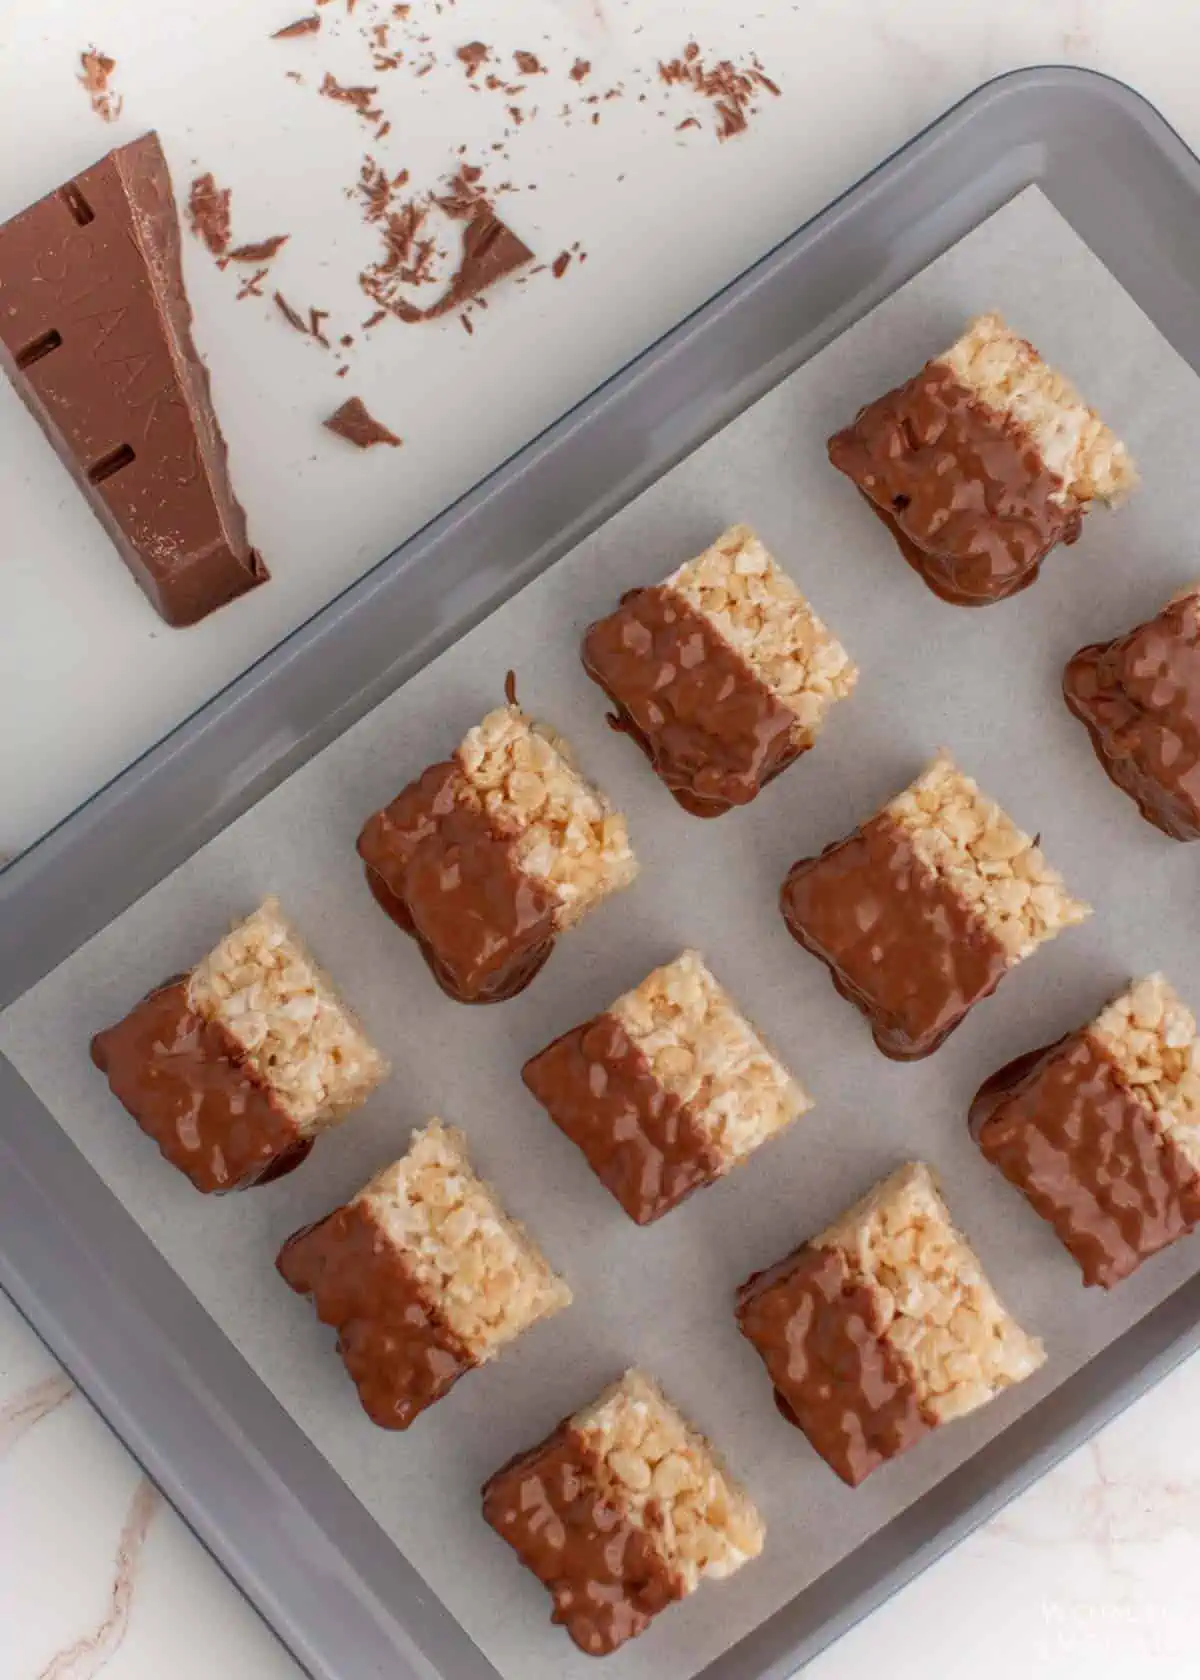 set chocolate coated rice krispies treats on baking sheet with parchment paper